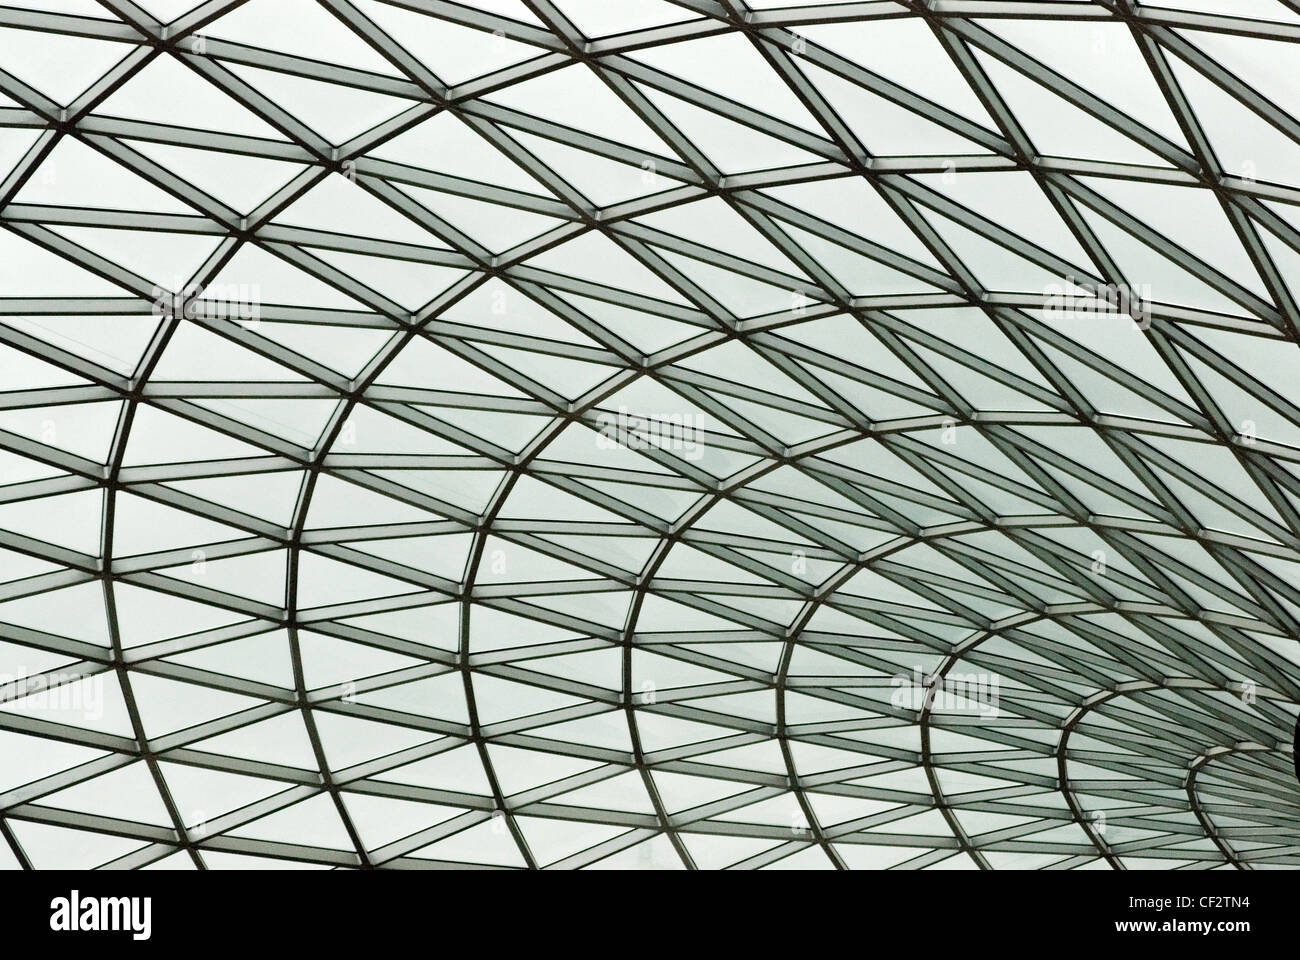 The glass ceiling of the atrium at the British Museum. Established in 1753, The British Museum is one of the world's largest and Stock Photo